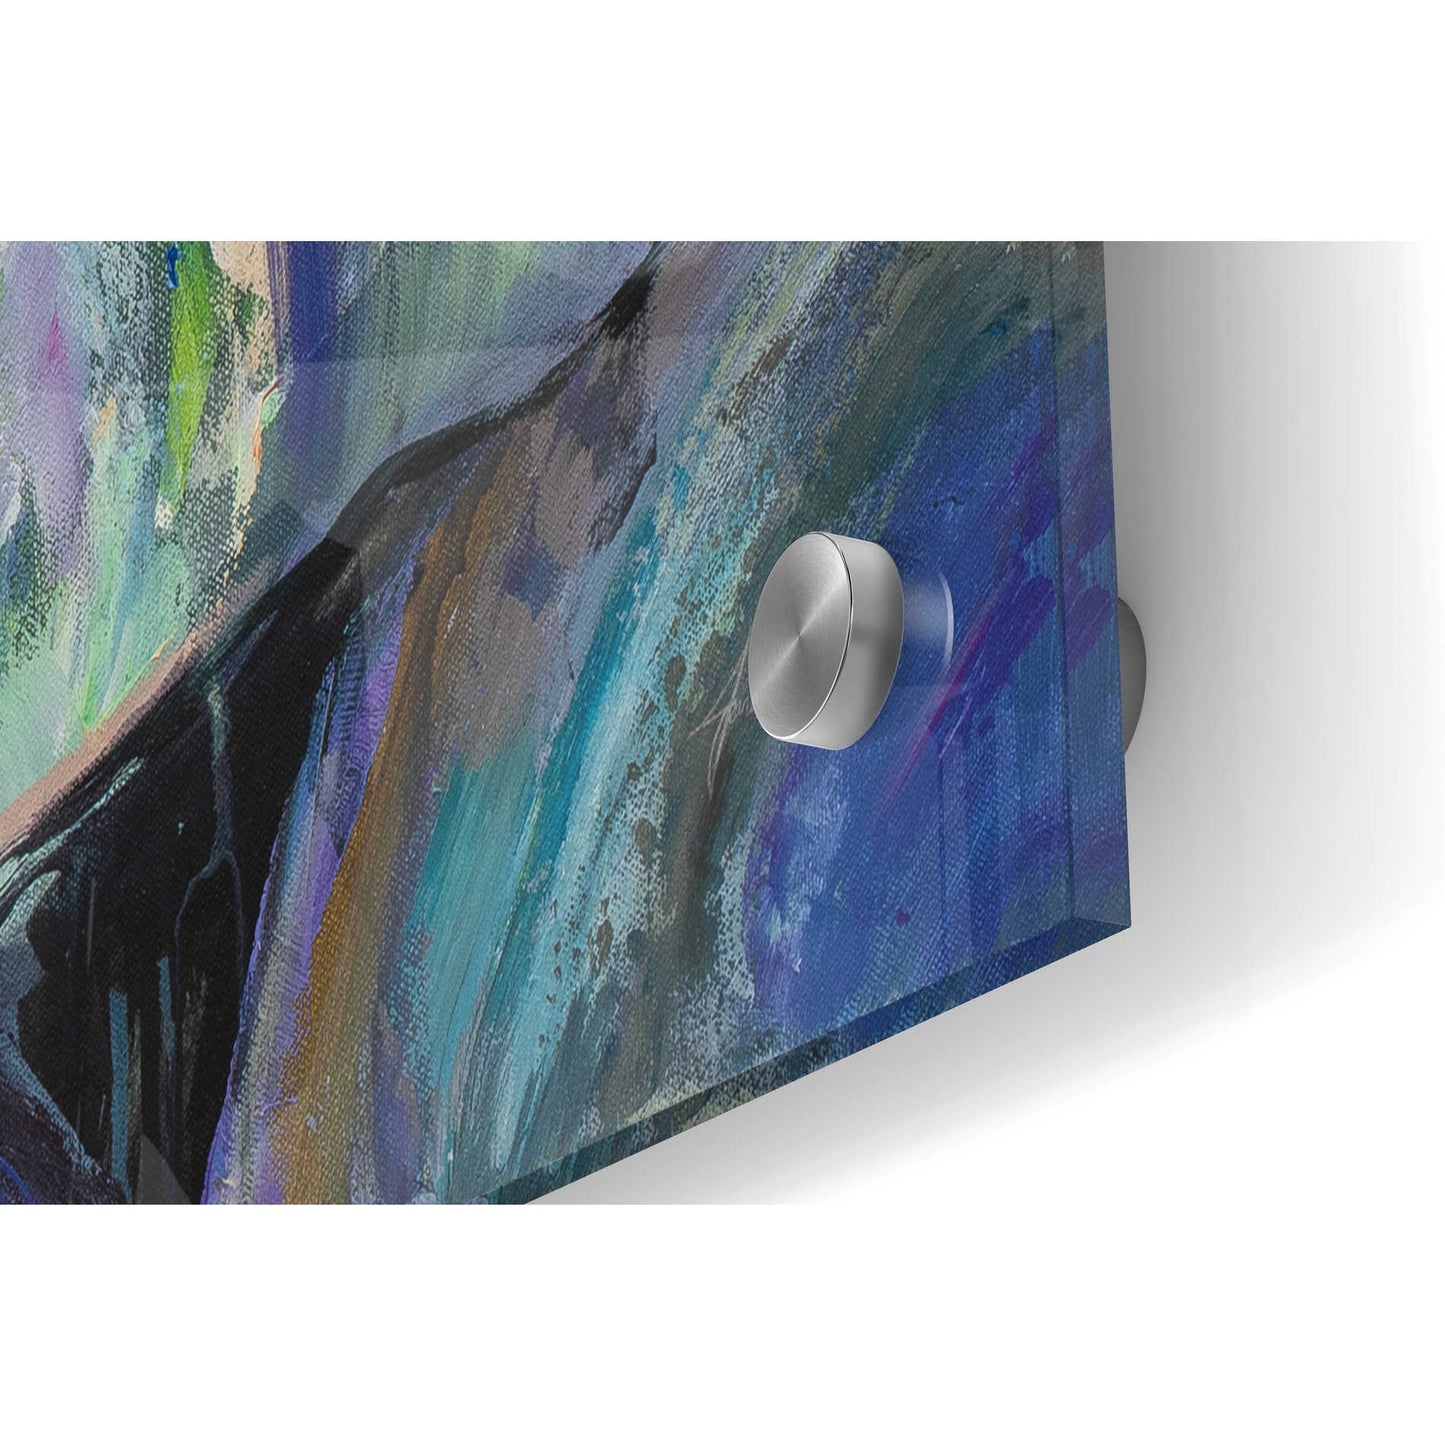 Epic Art 'Variety' by Jeanette Vertentes, Acrylic Glass Wall Art,36x24